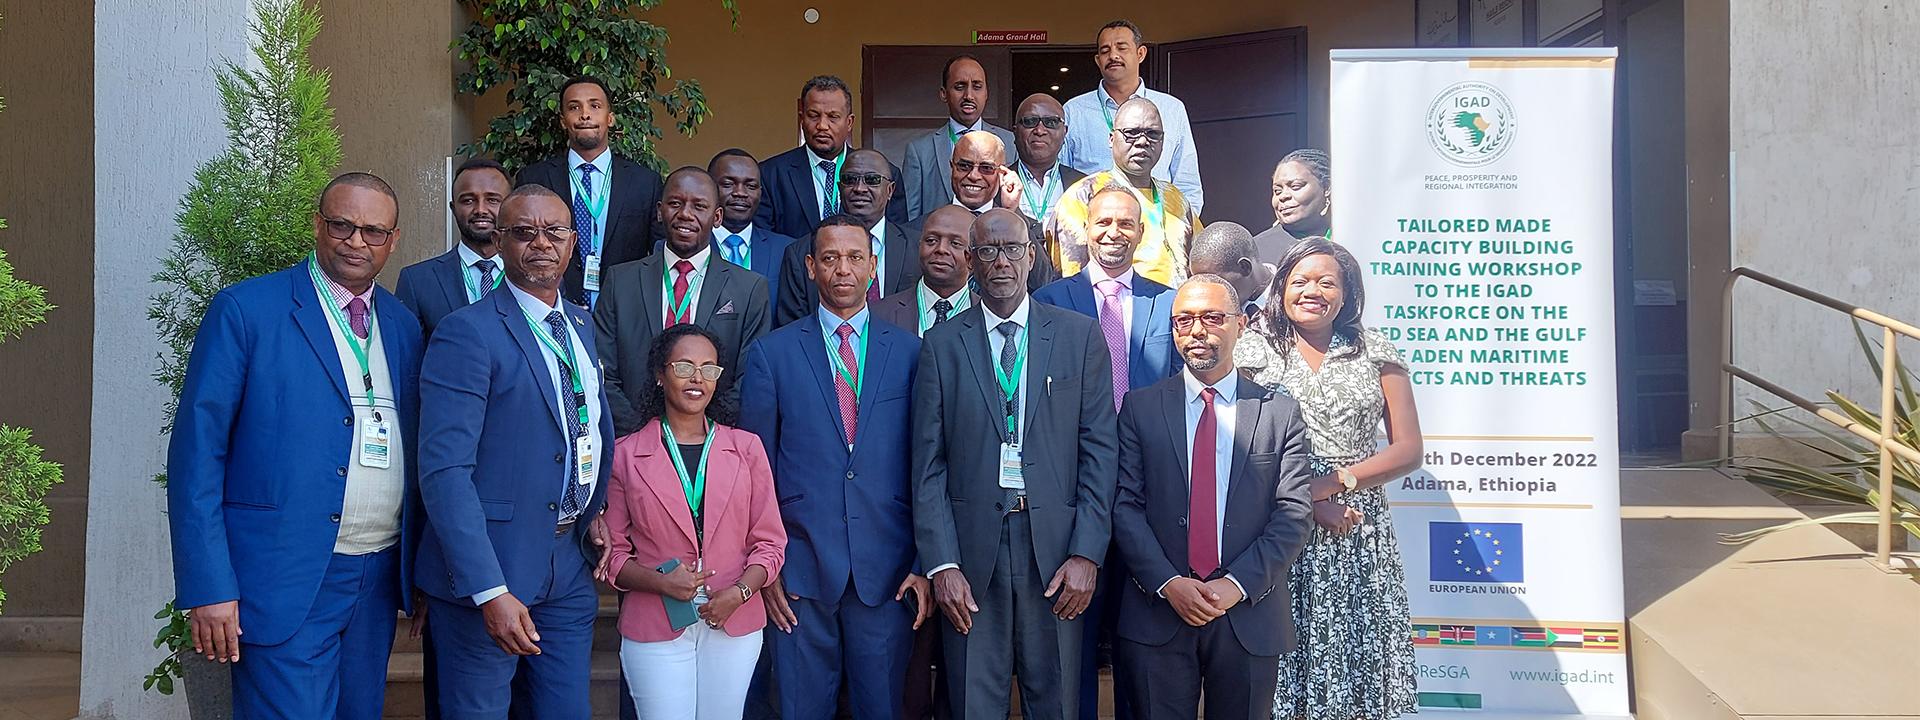 COMMUNIQUÉ – 5th Session of the IGAD Taskforce on the Red Sea and the Gulf of Aden